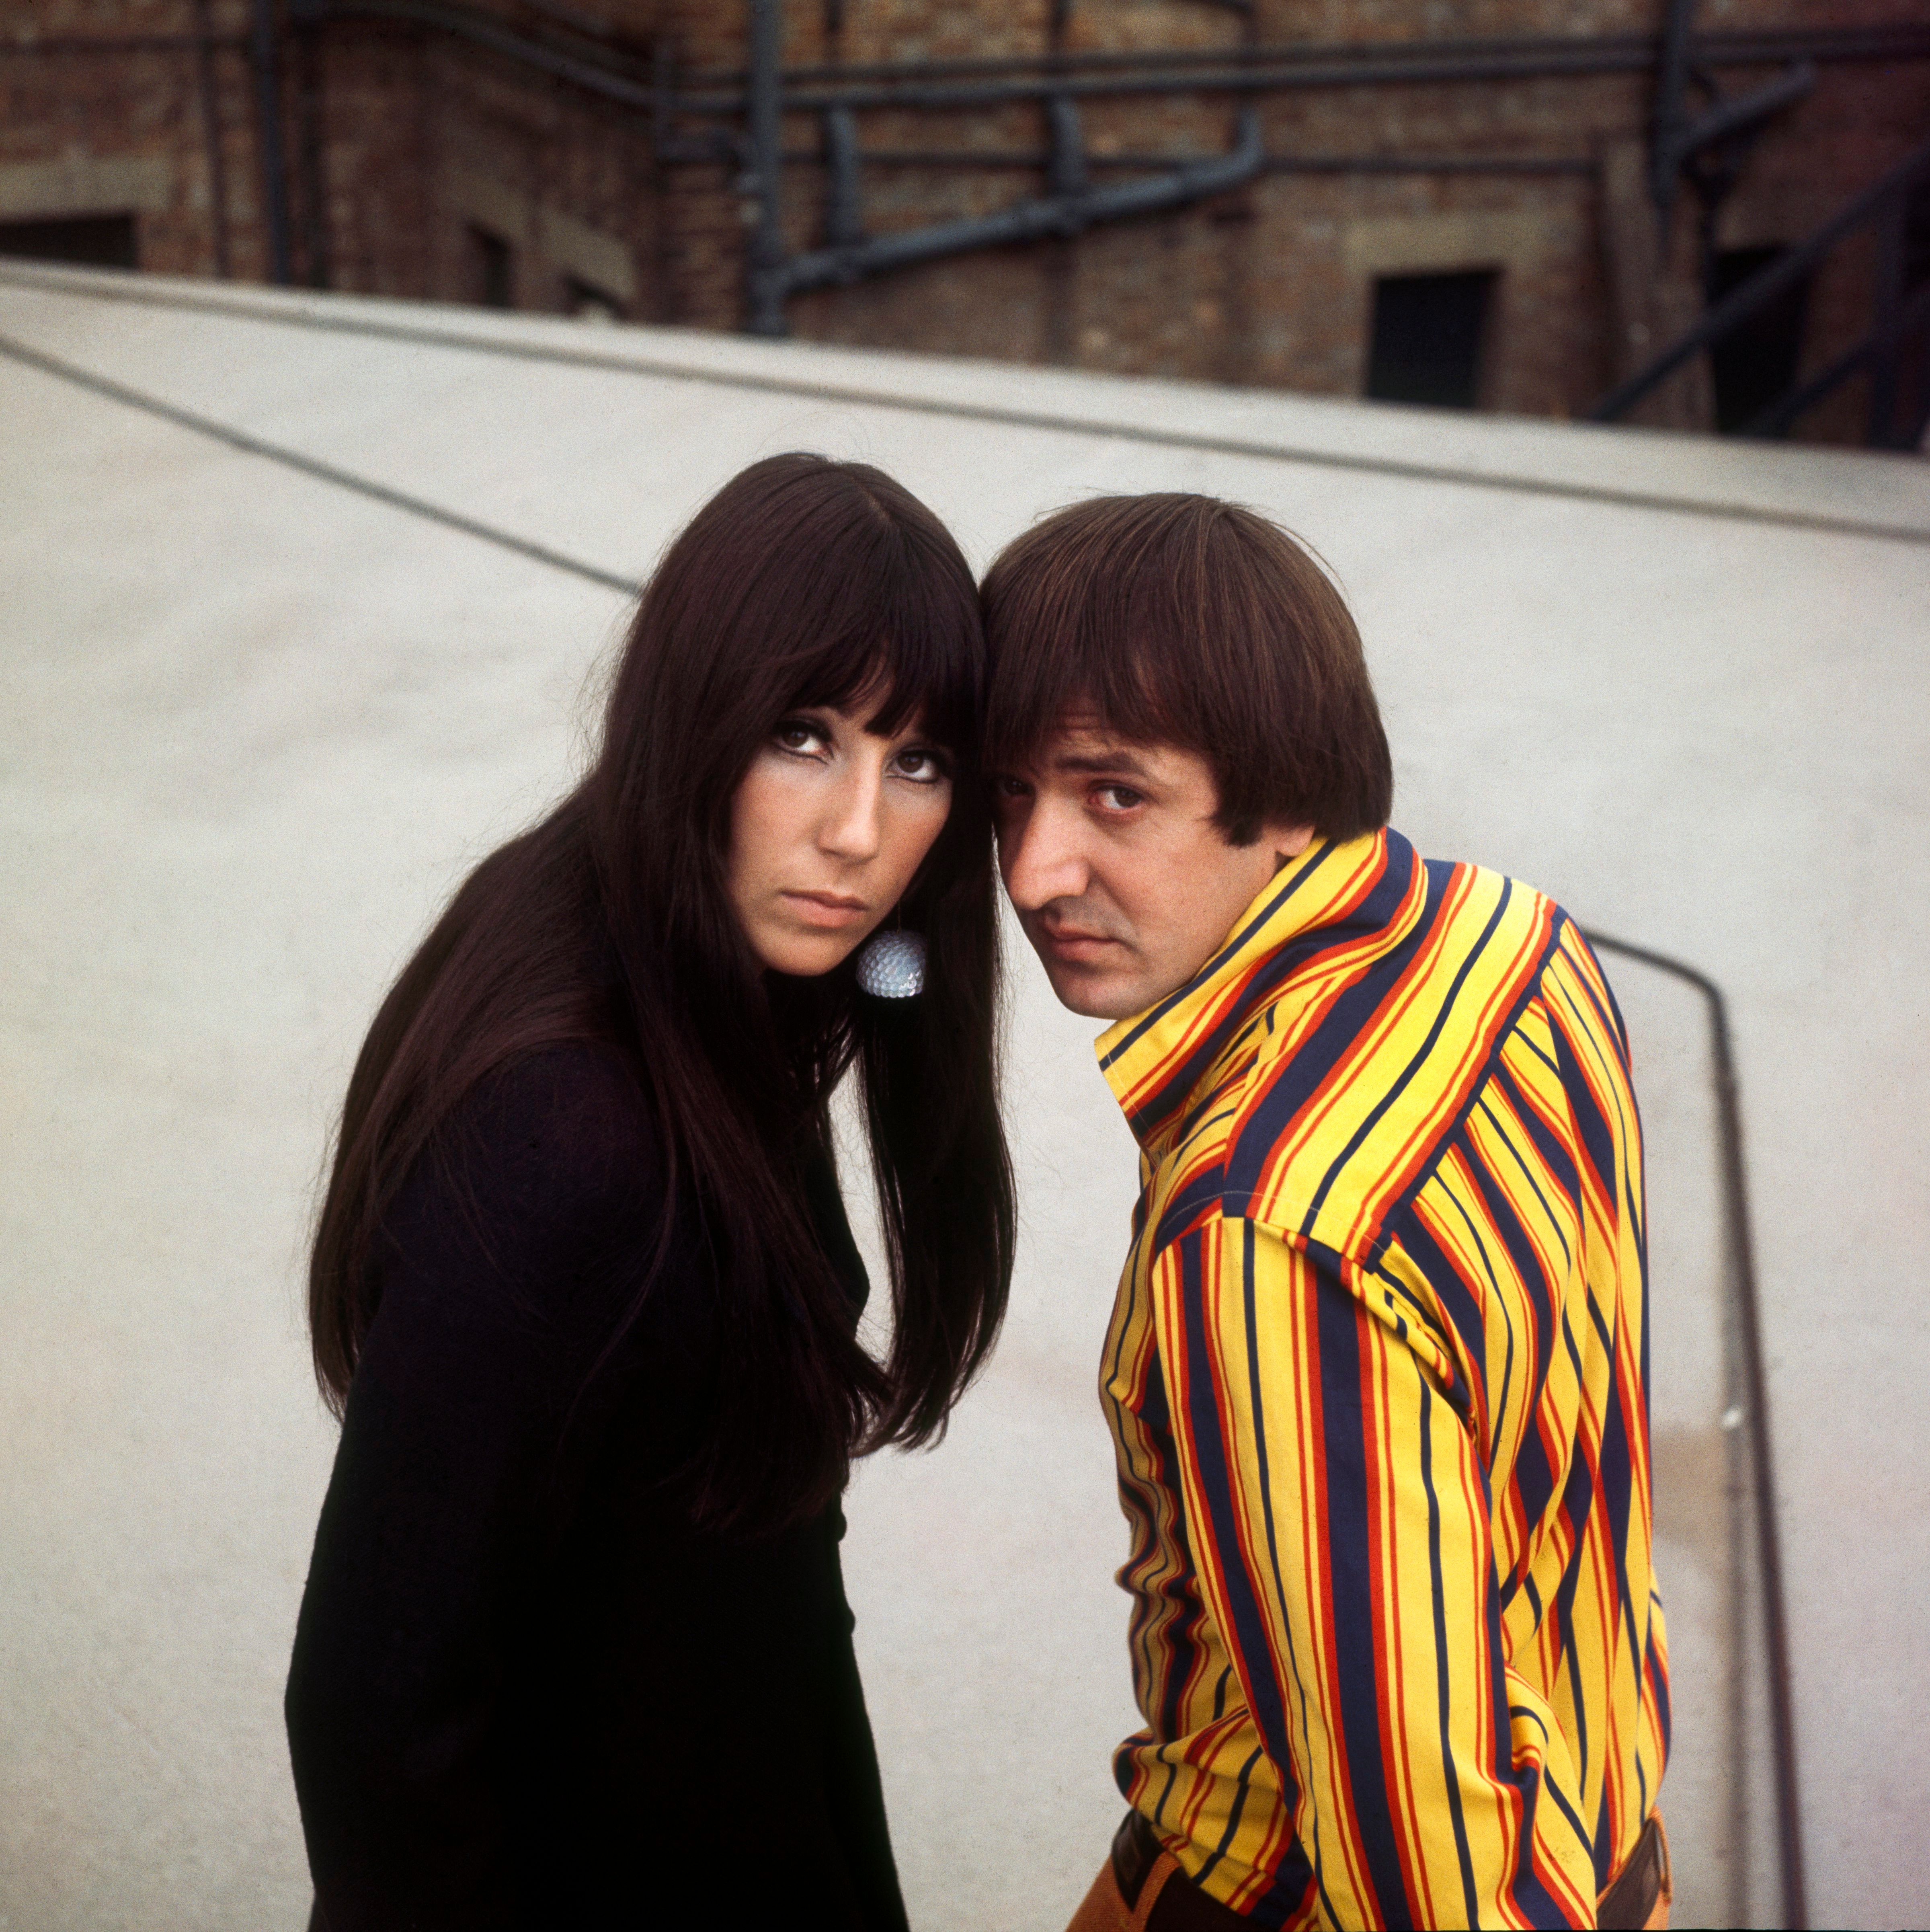 Cher und Sonny Bono in London am 1. Januar 1973 | Quelle: George Wilkes/Hulton Archive/Getty Images